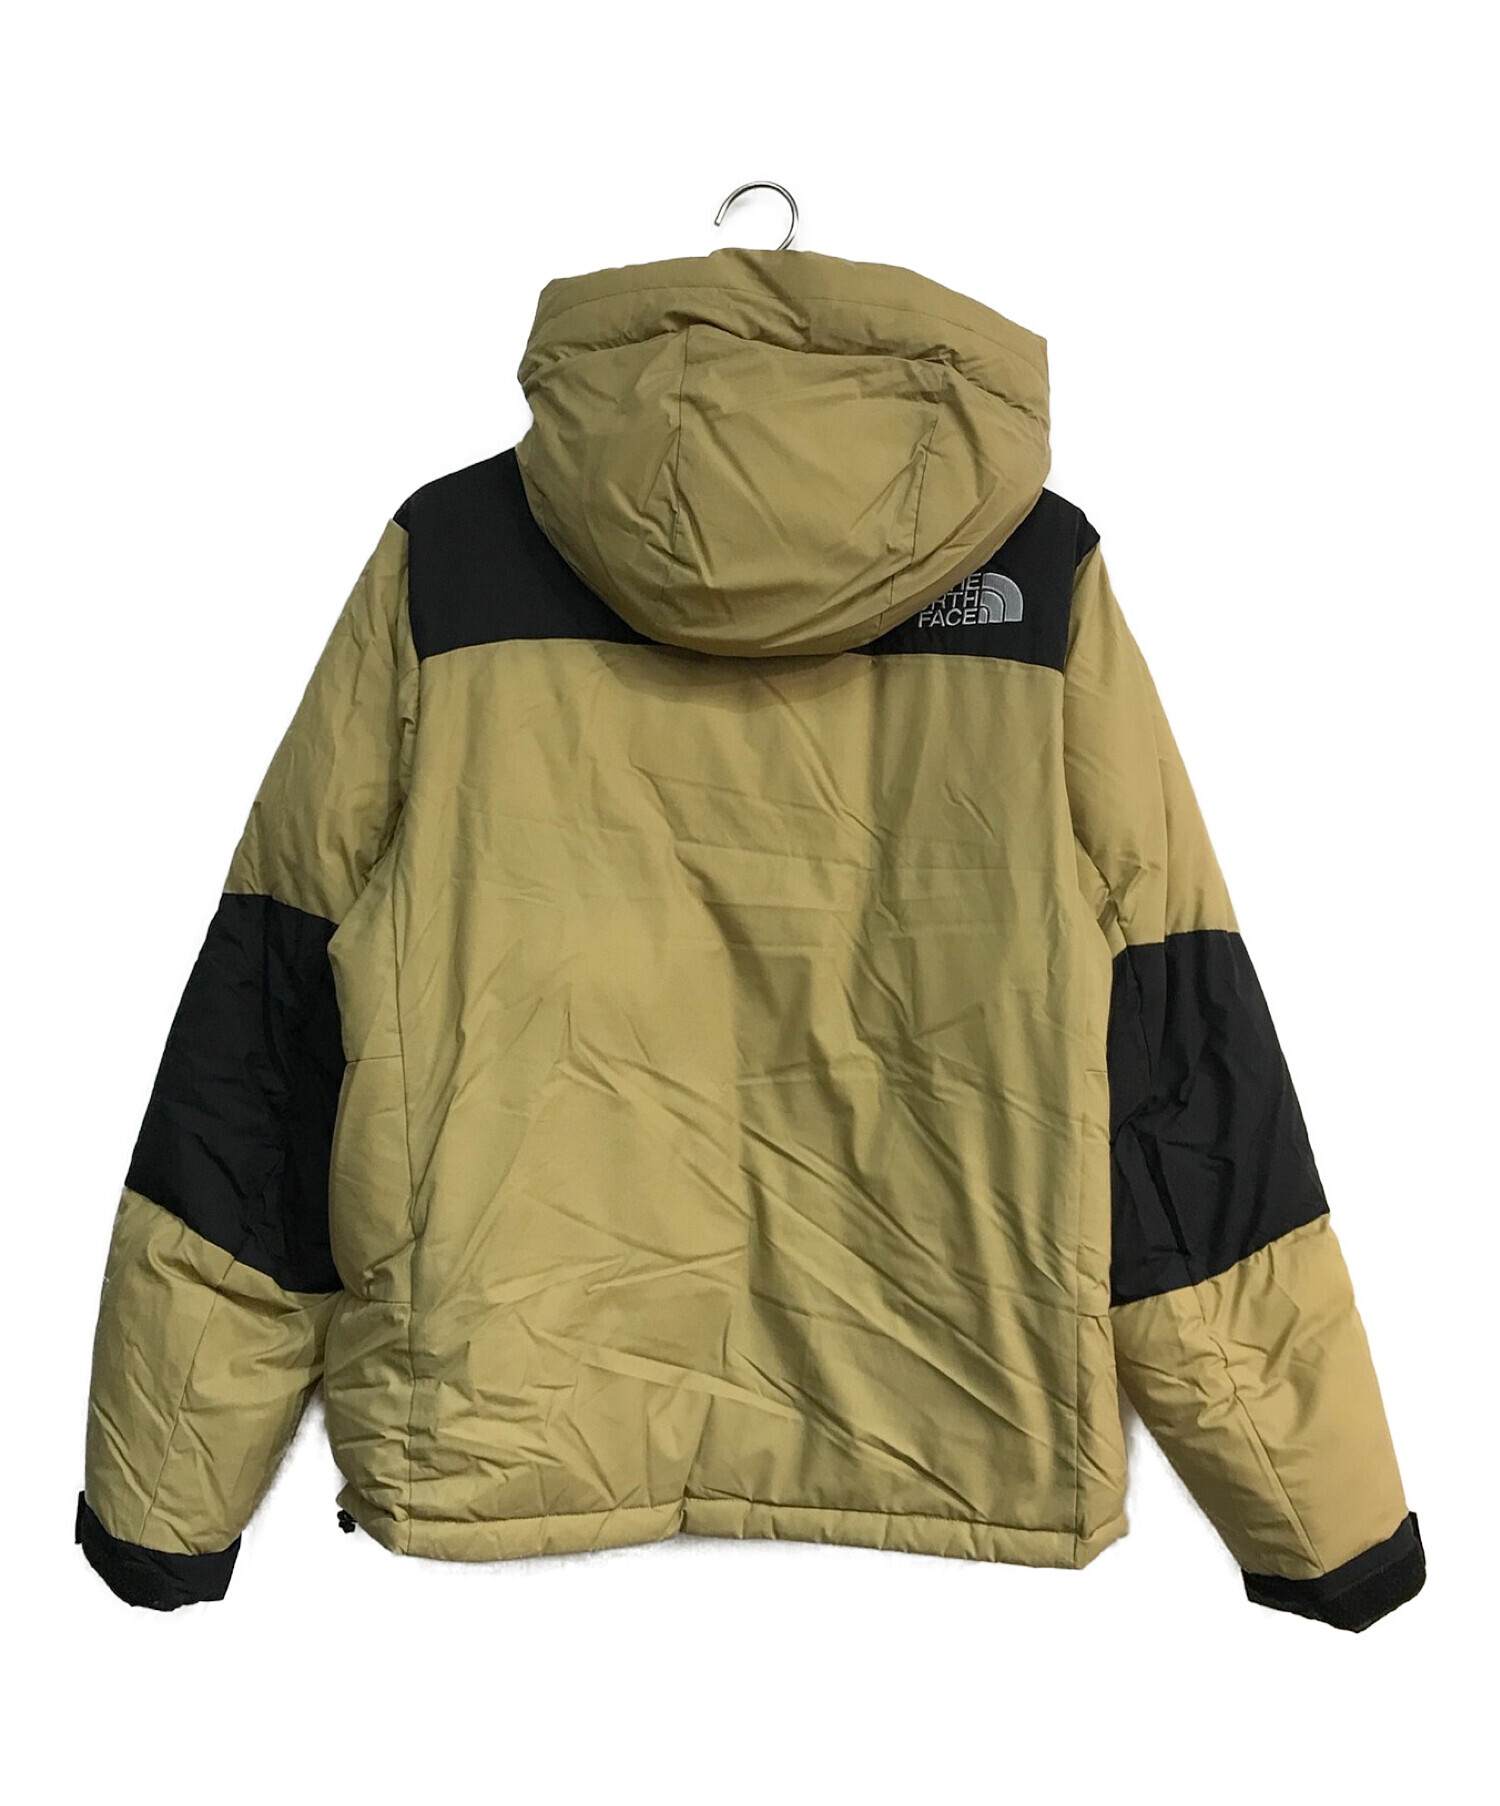 THE NORTH FACE Baltro Light Jacket ケルプタン-